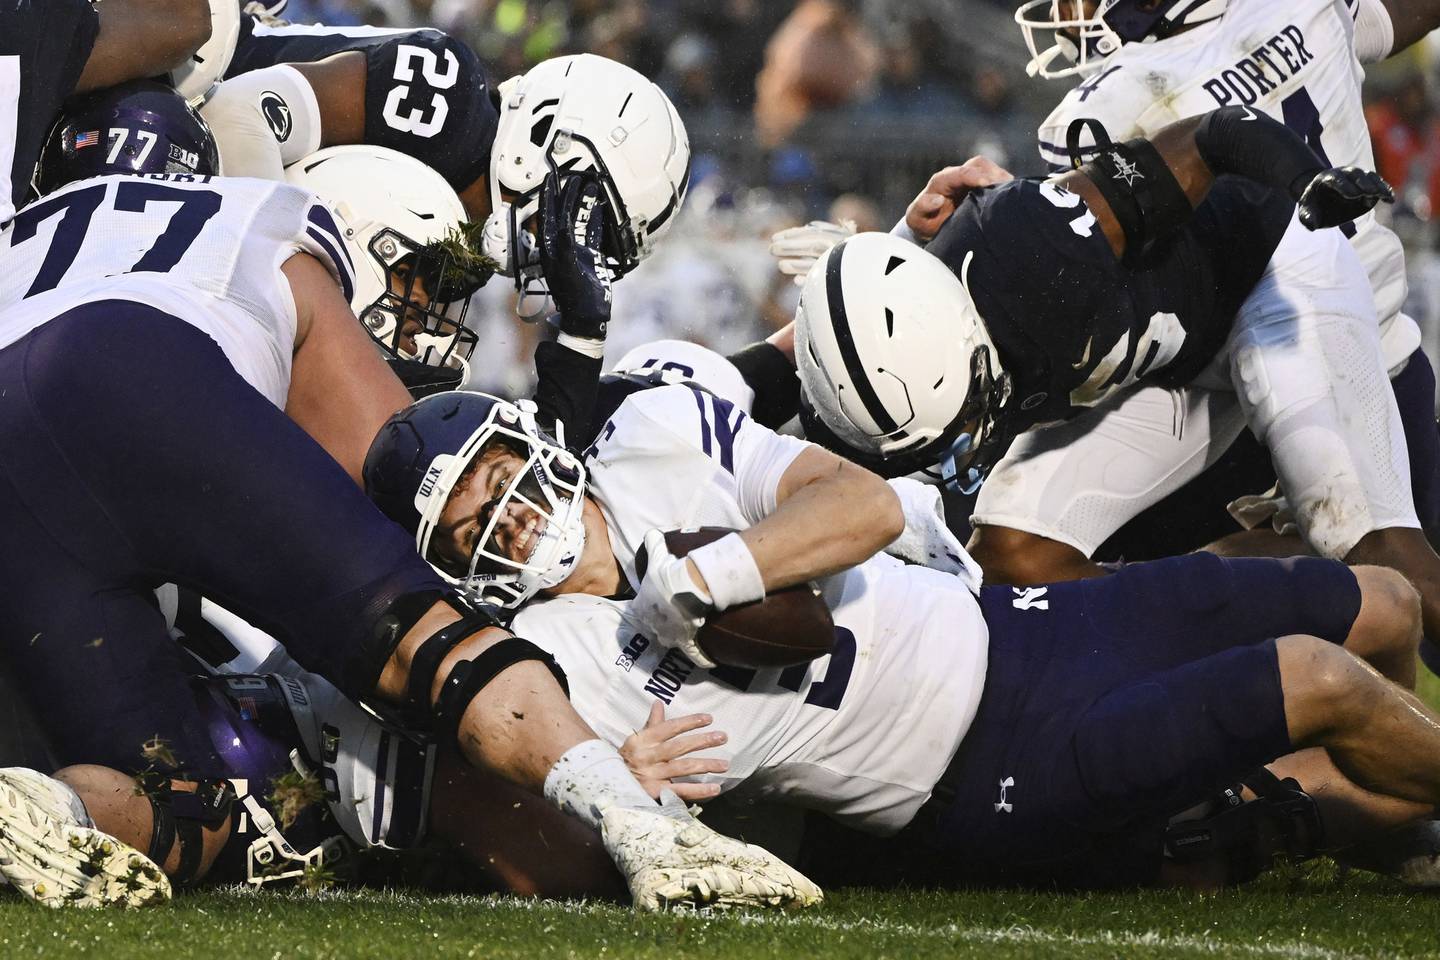 Northwestern quarterback Ryan Hilinski is stopped short of the end zone on fourth-and-goal against Penn State defenders Ji'Ayir Brown (16) and Curtis Jacobs during the fourth quarter Saturday in State College, Pa. 